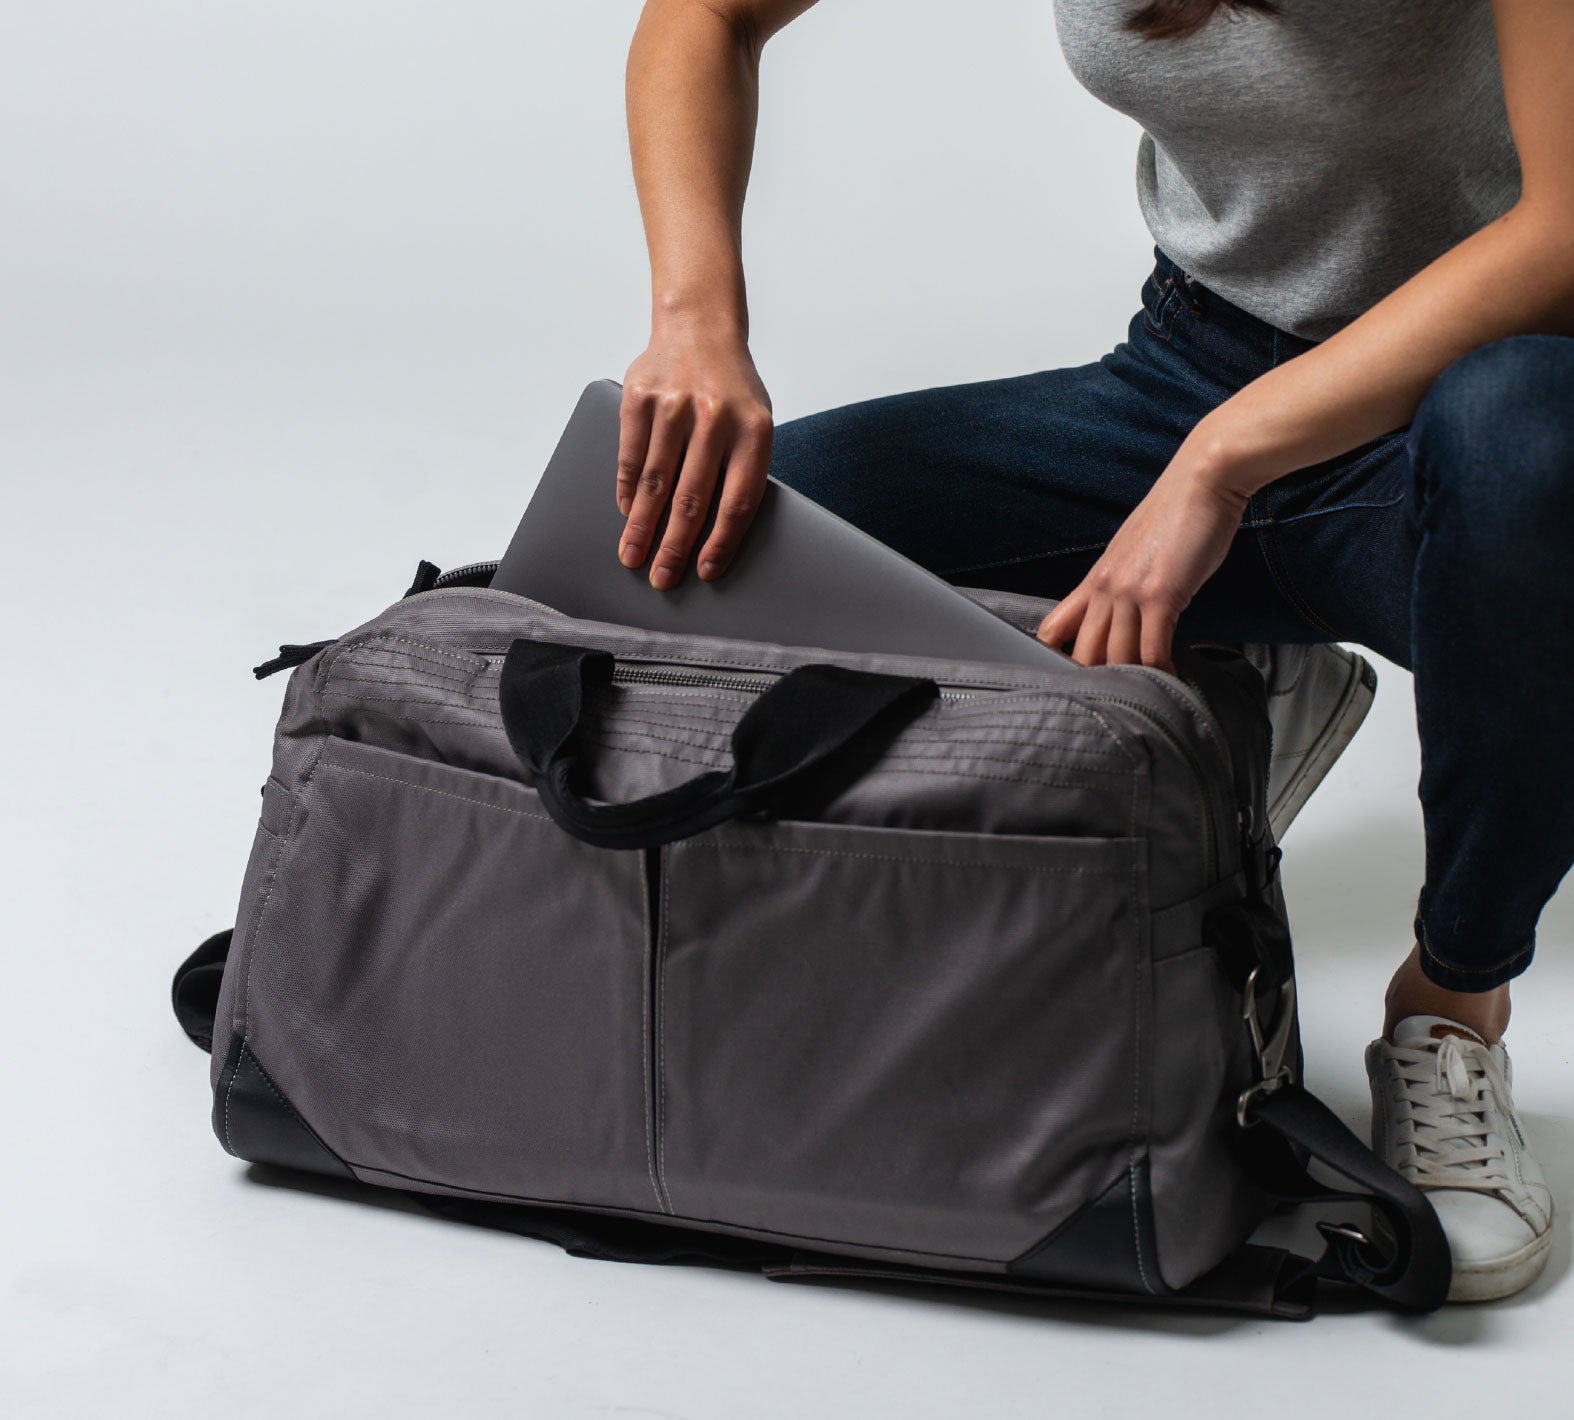 The Pakt Travel Backpack - The Ultimate Carry-on Bag for Travelers